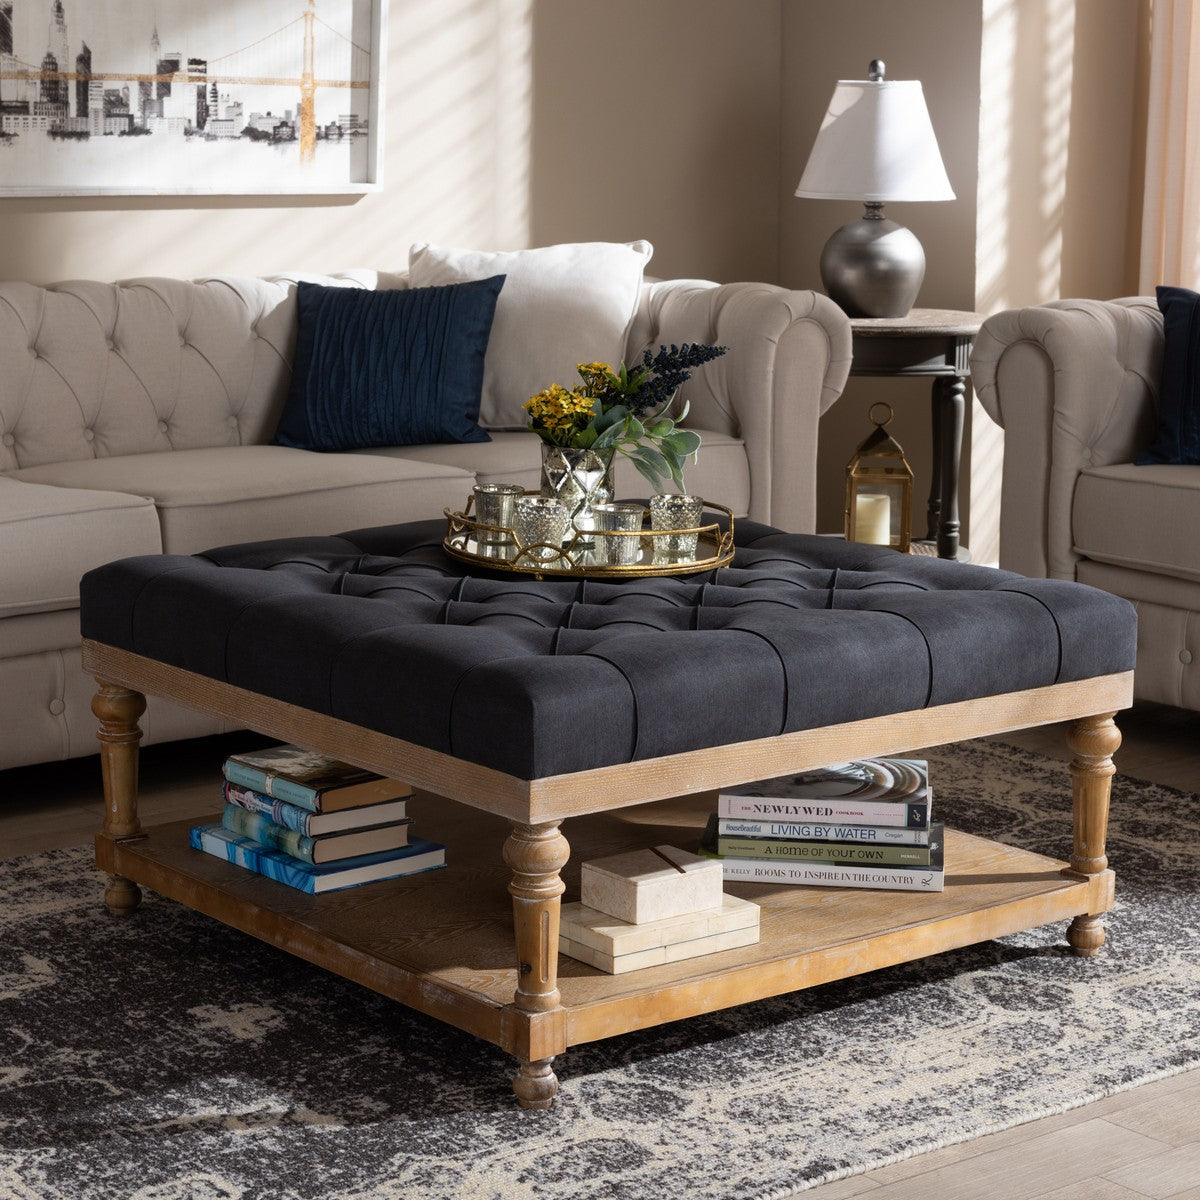 Baxton Studio Kelly Modern and Rustic Charcoal Linen Fabric Upholstered and Greywashed Wood Cocktail Ottoman